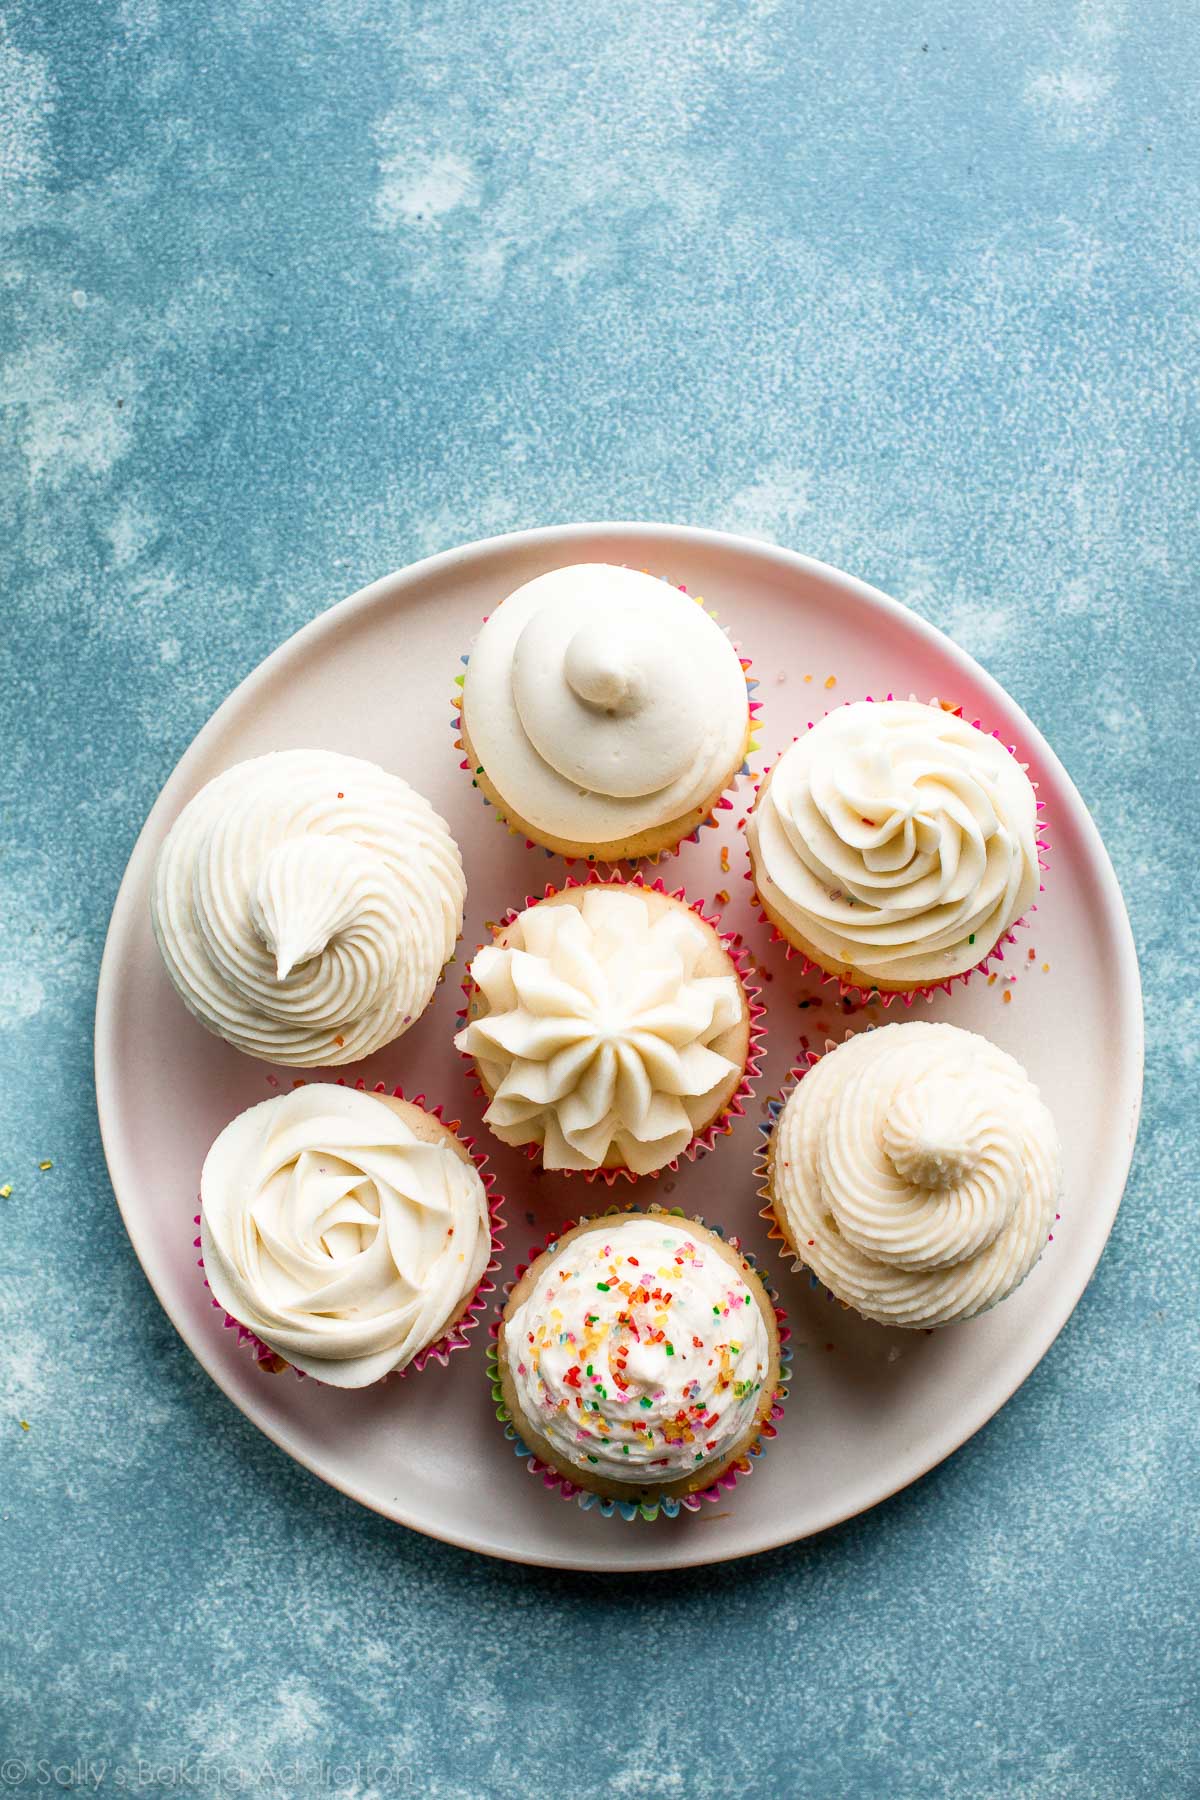 a plate of cupcakes decorated with vanilla buttercream using various piping tips